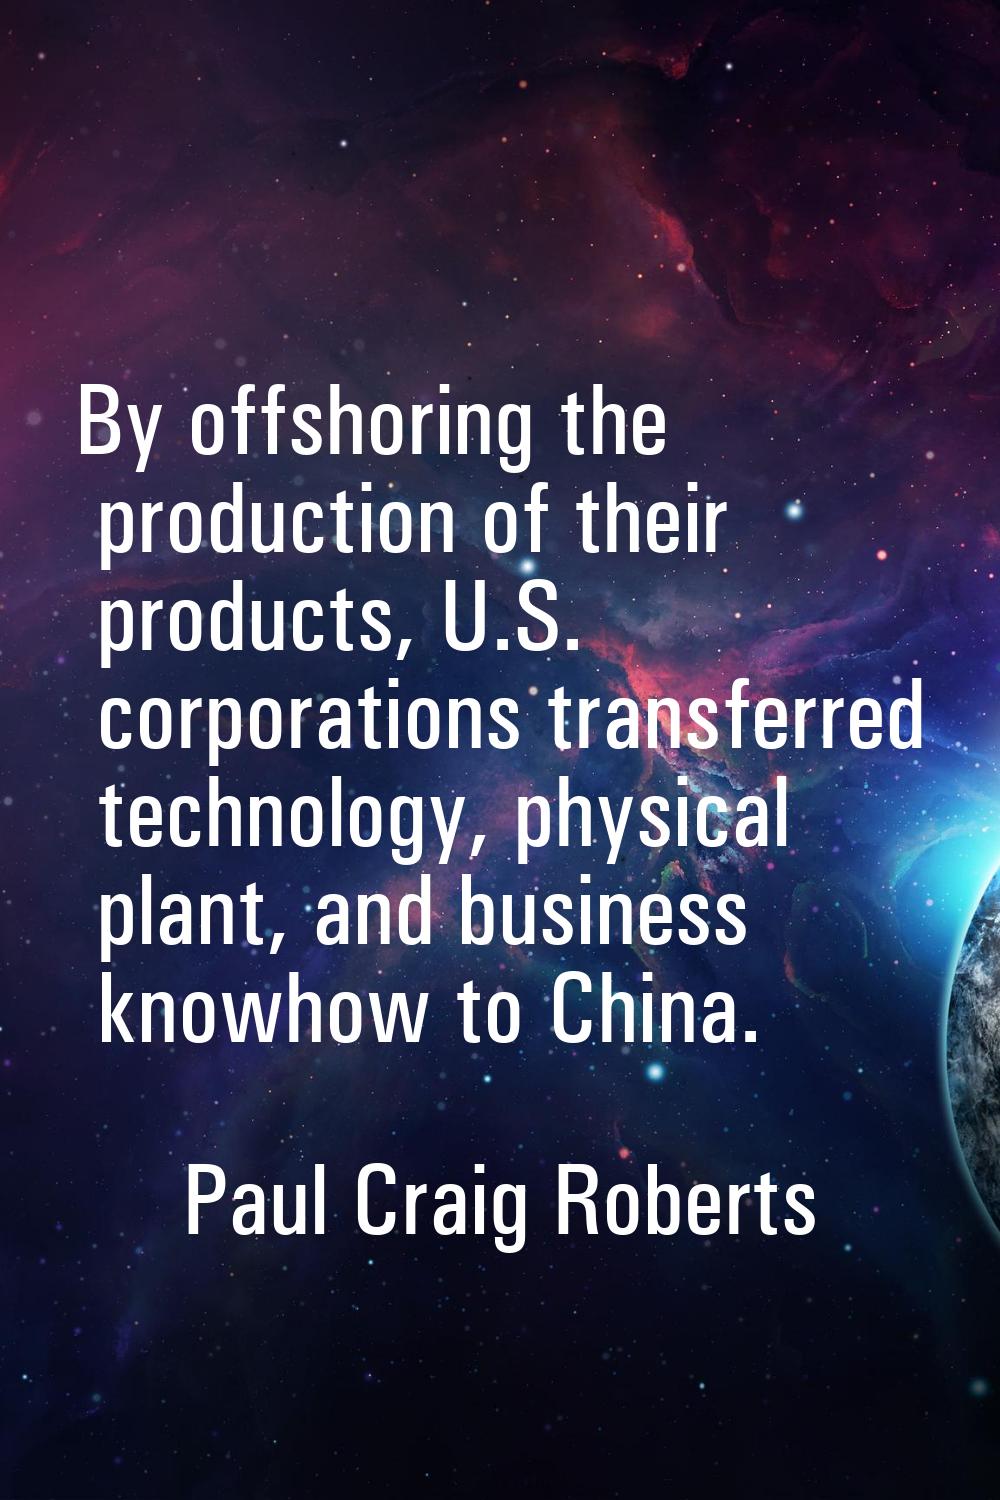 By offshoring the production of their products, U.S. corporations transferred technology, physical 